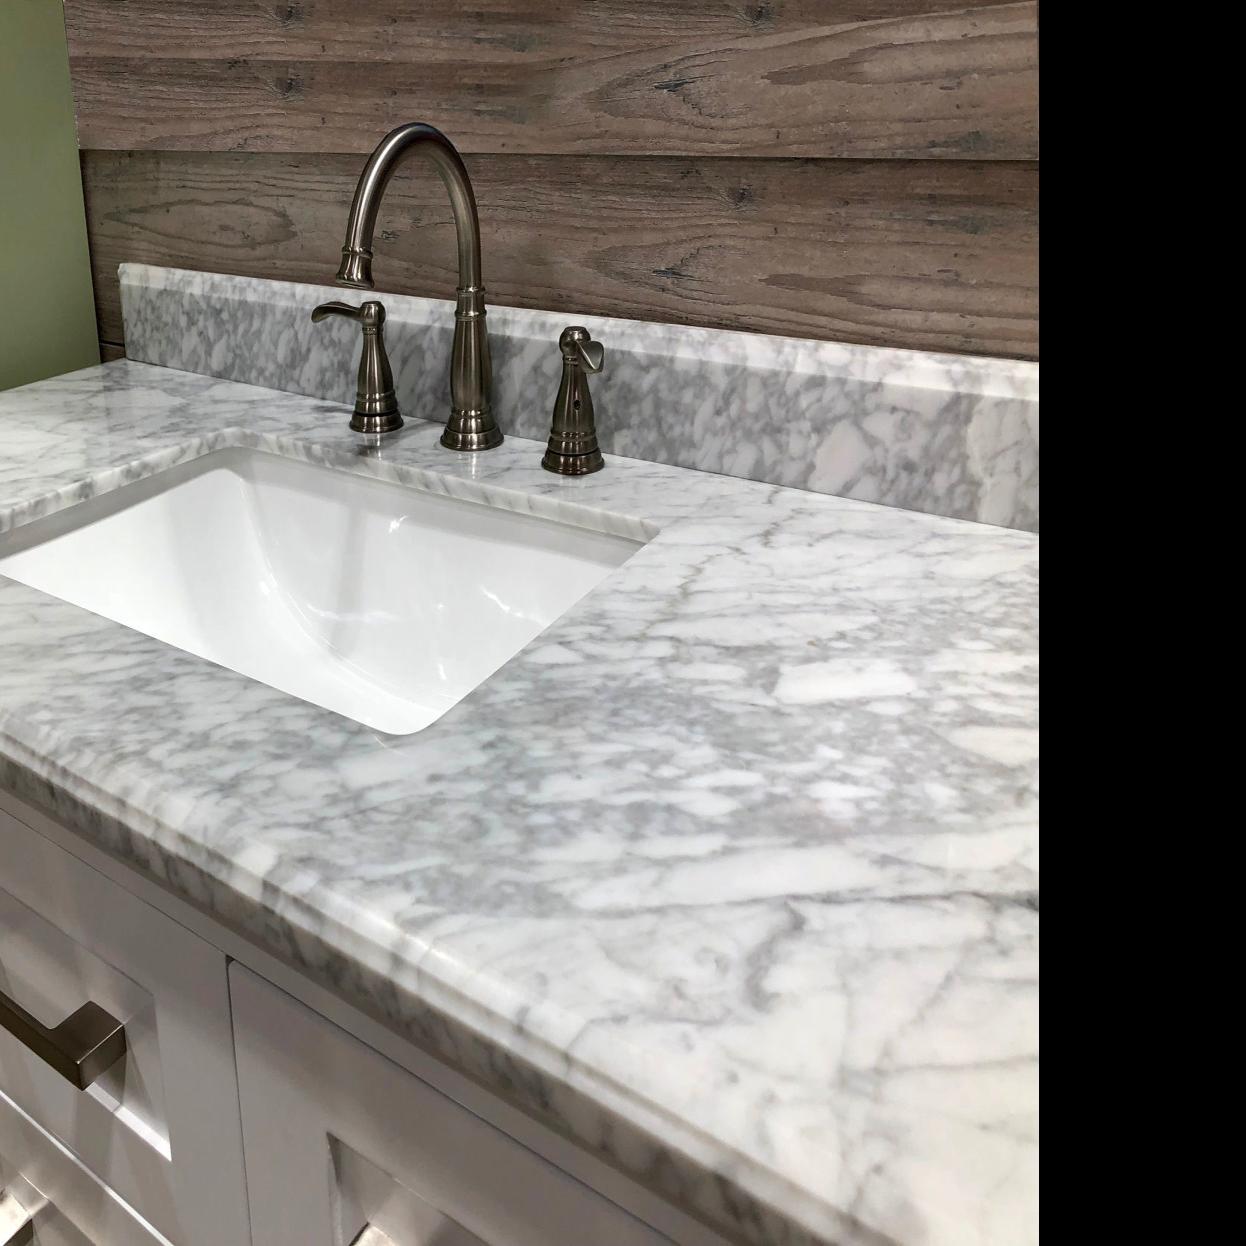 Can I Repair The Damage To My Engineered Marble Counter Top